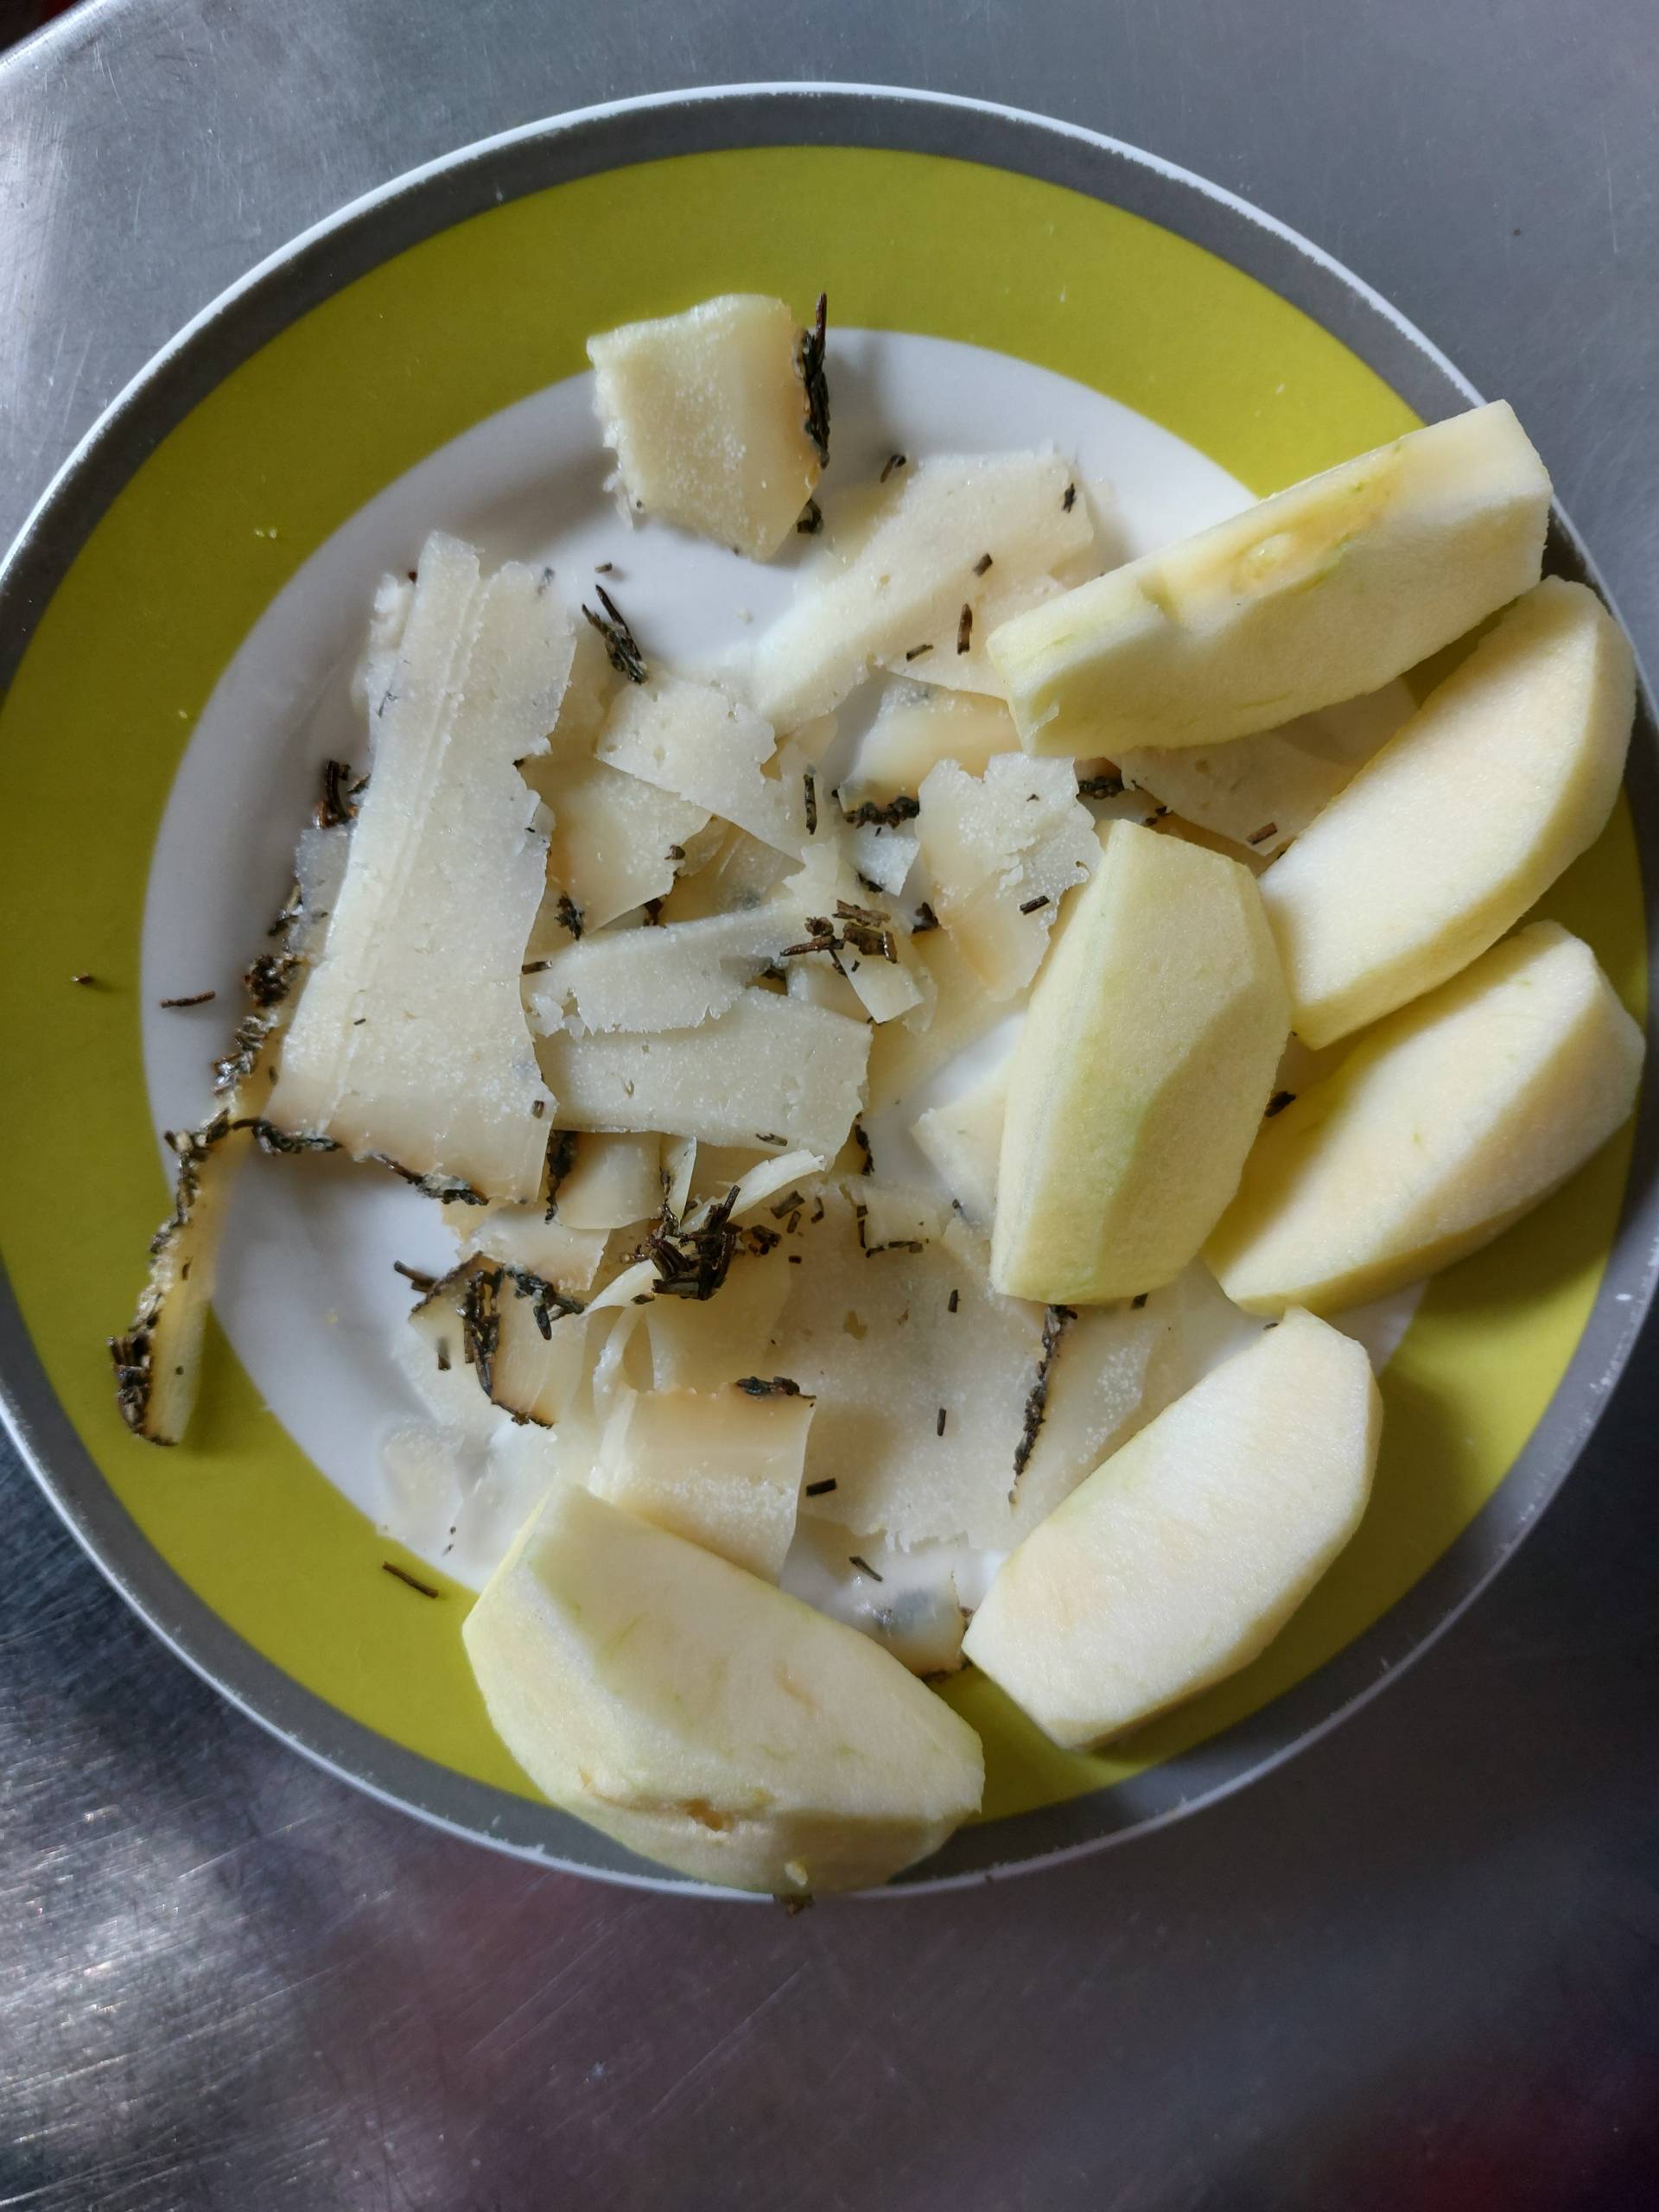 How to make apple and cheese salad?